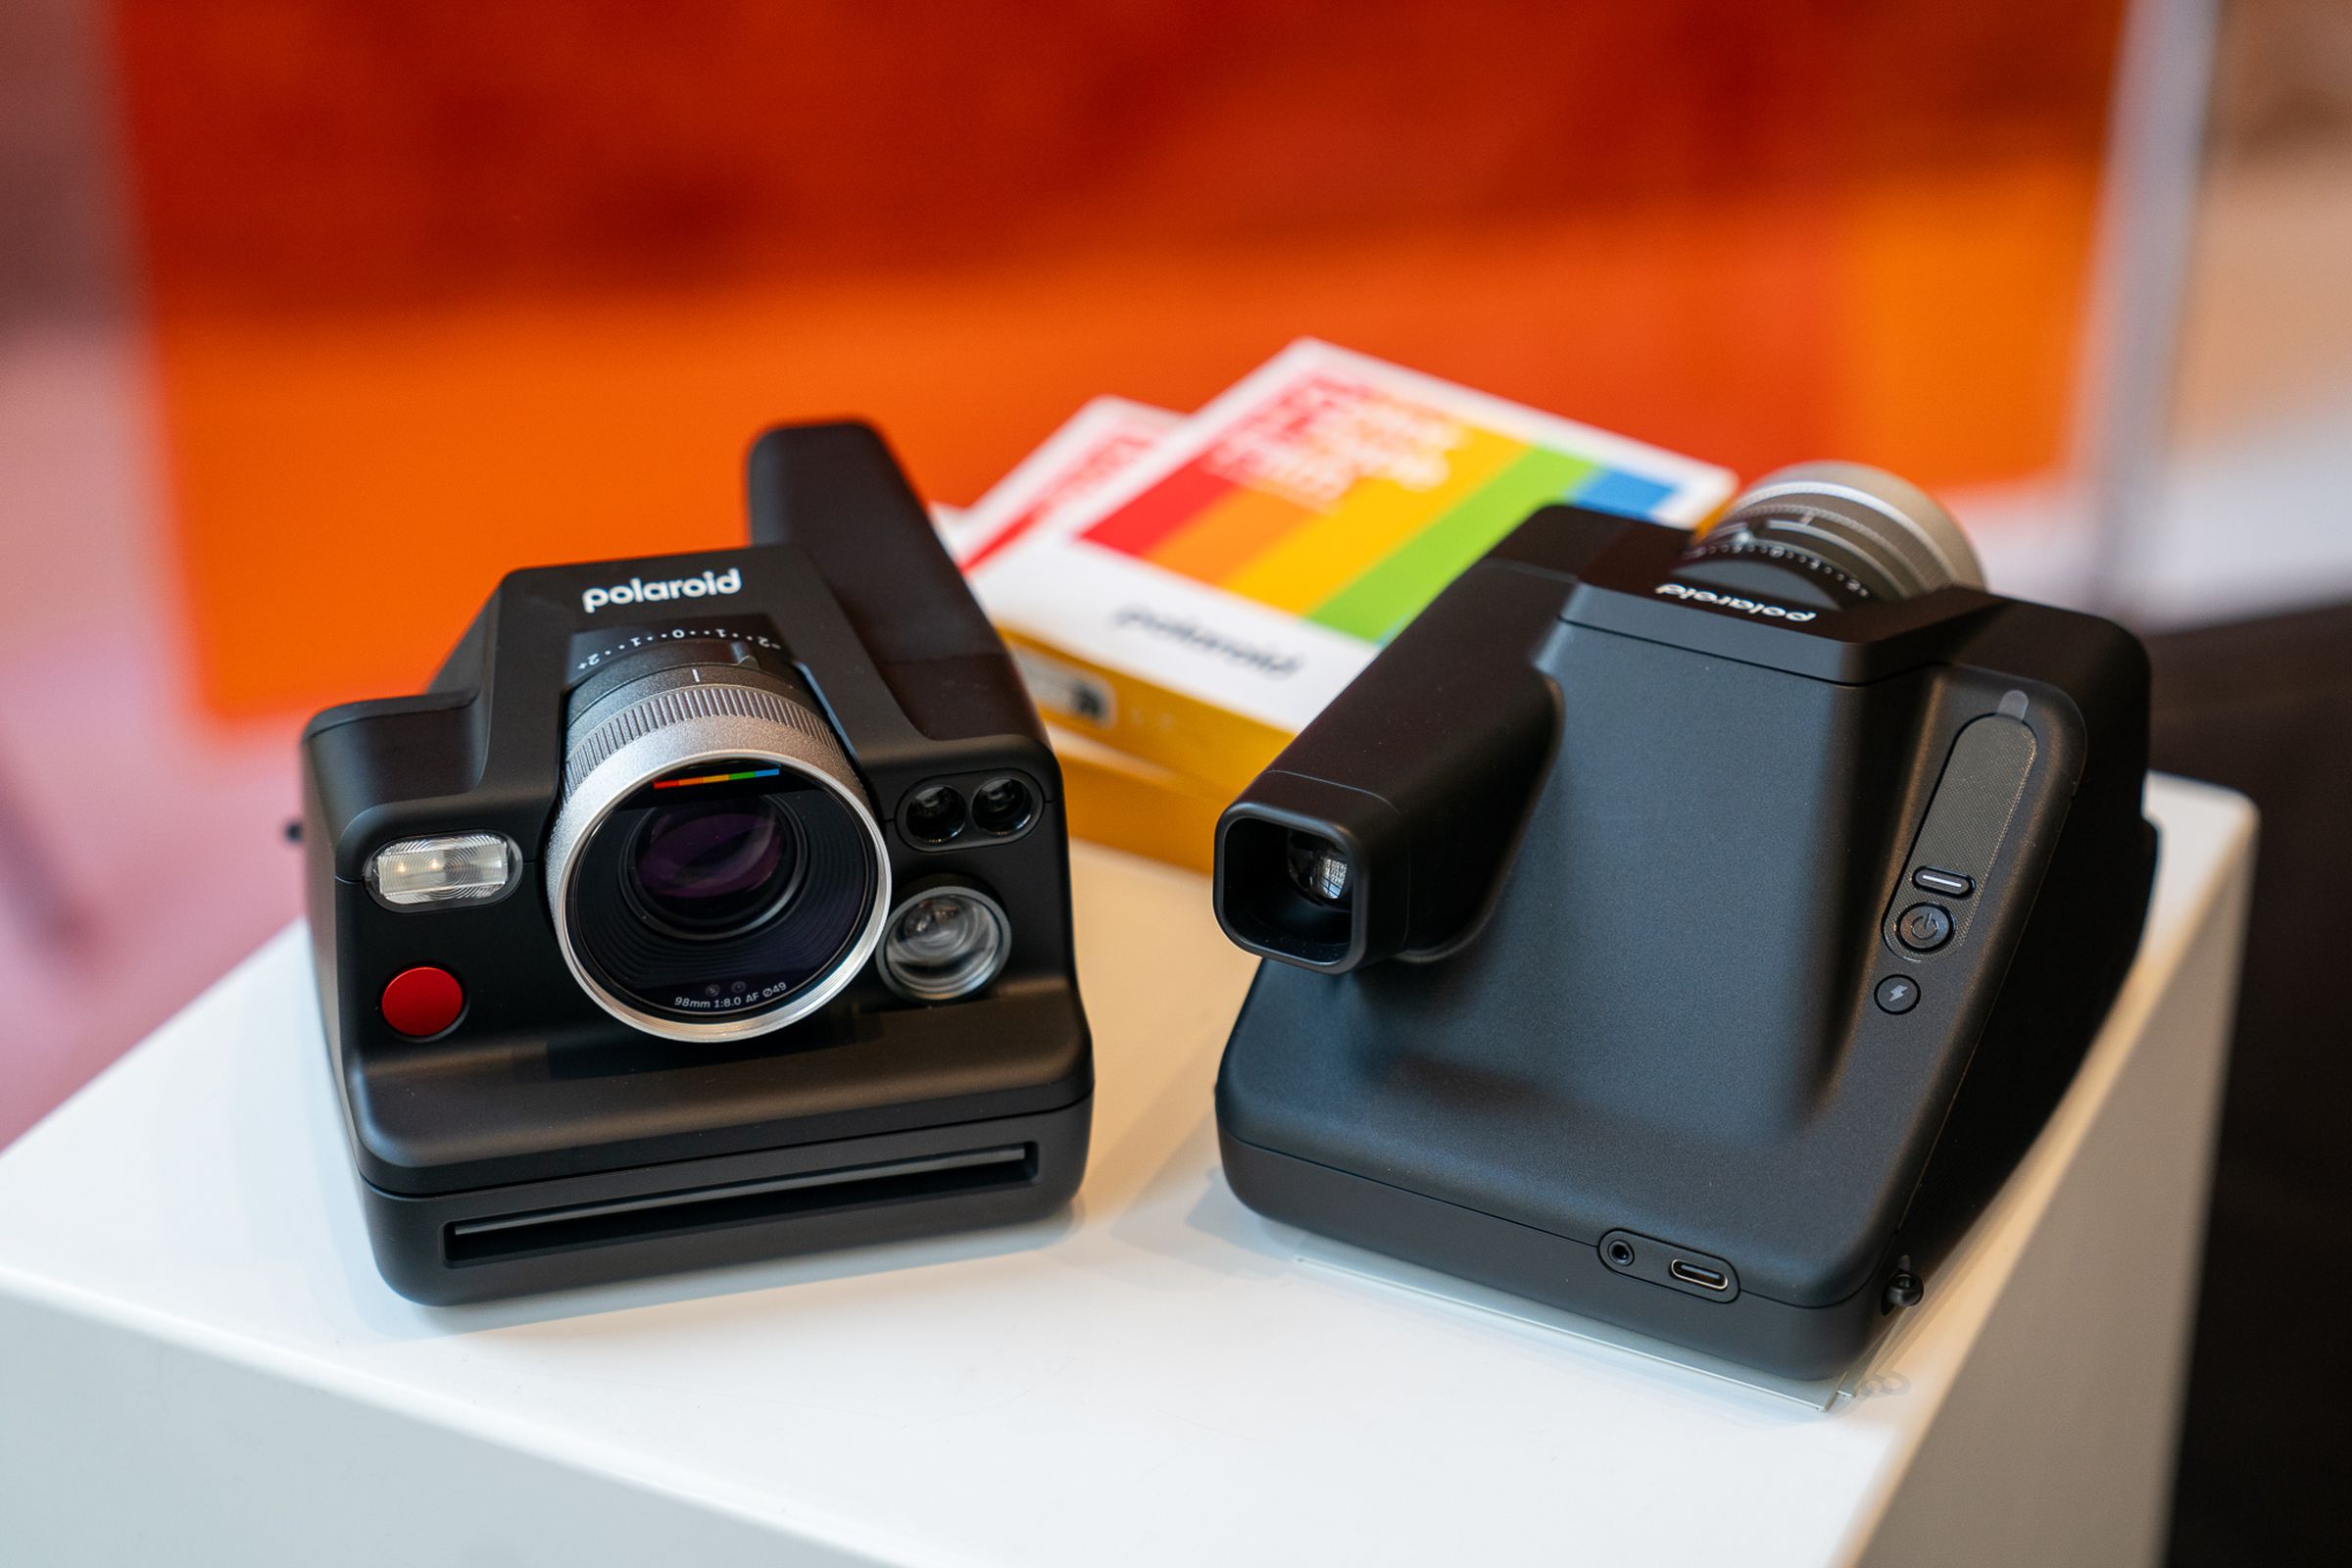 Two Polaroid I-2 instant cameras sitting on top of a counter. One shows the front while the other displays the back. A pack of Polaroid film sits nearby.